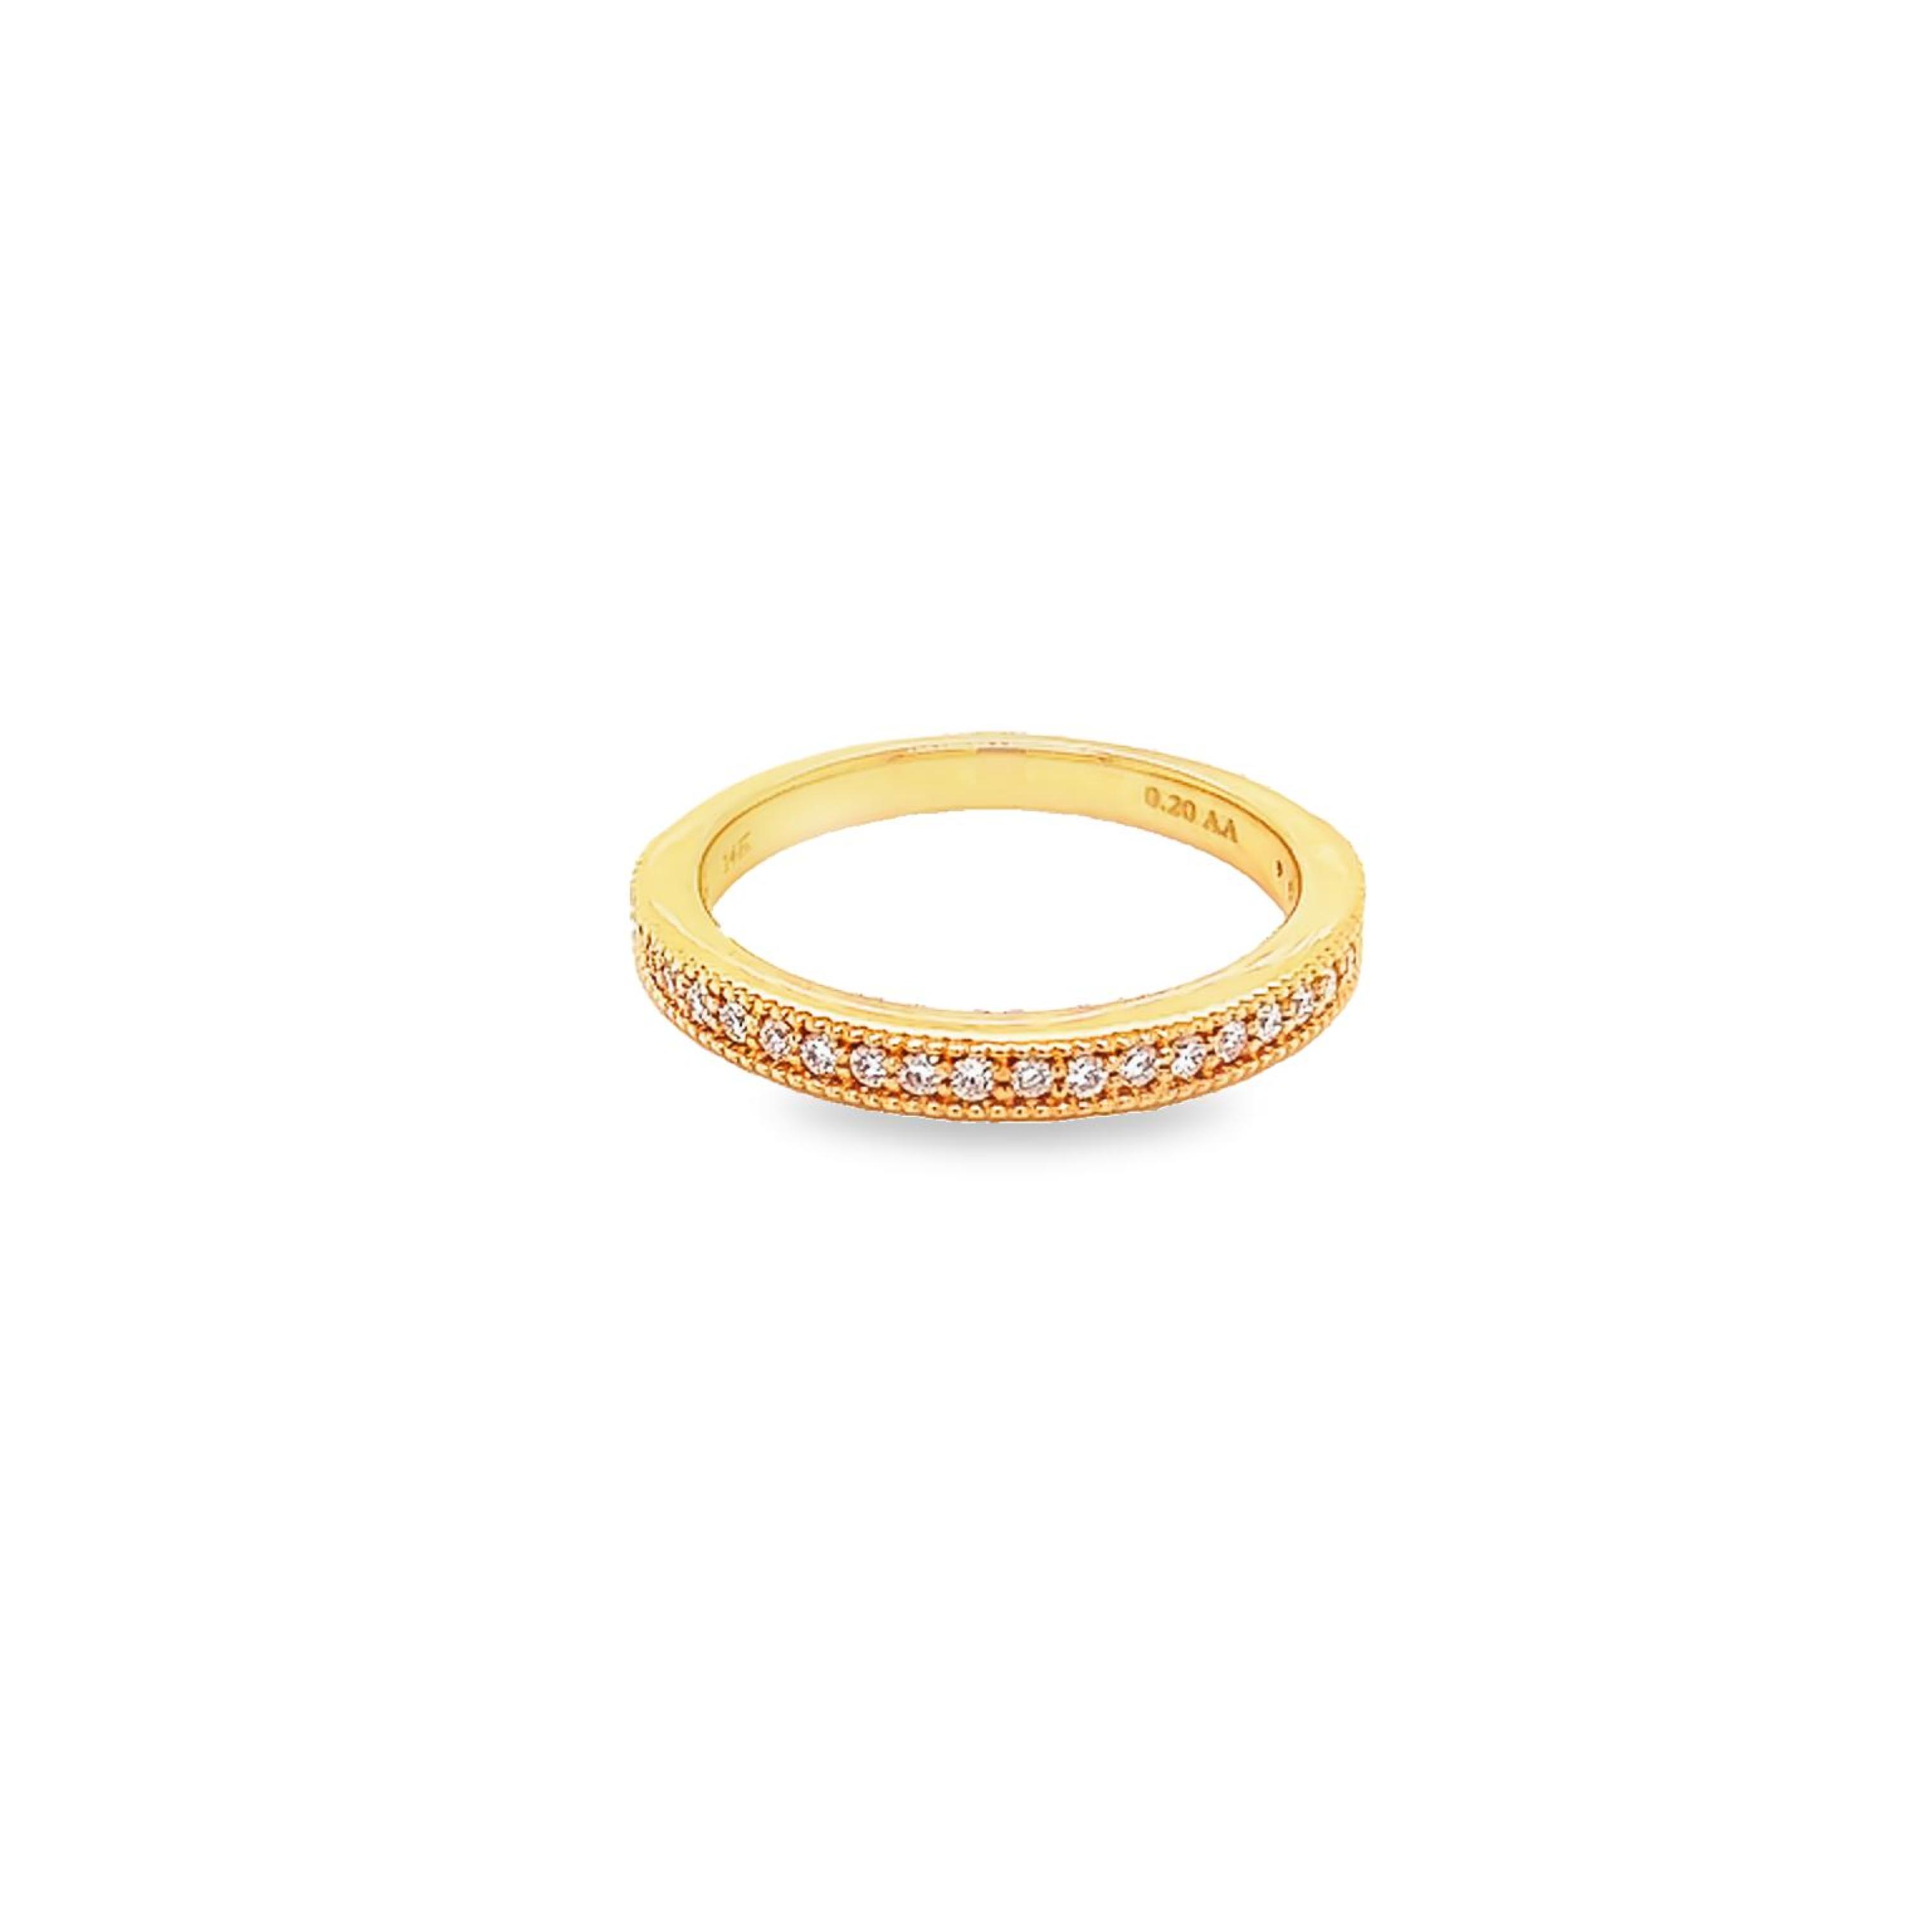 14 Karat yellow gold wedding band with milgrain with 25=0.20 total weight round brilliant G VS Diamonds. Size 6.5